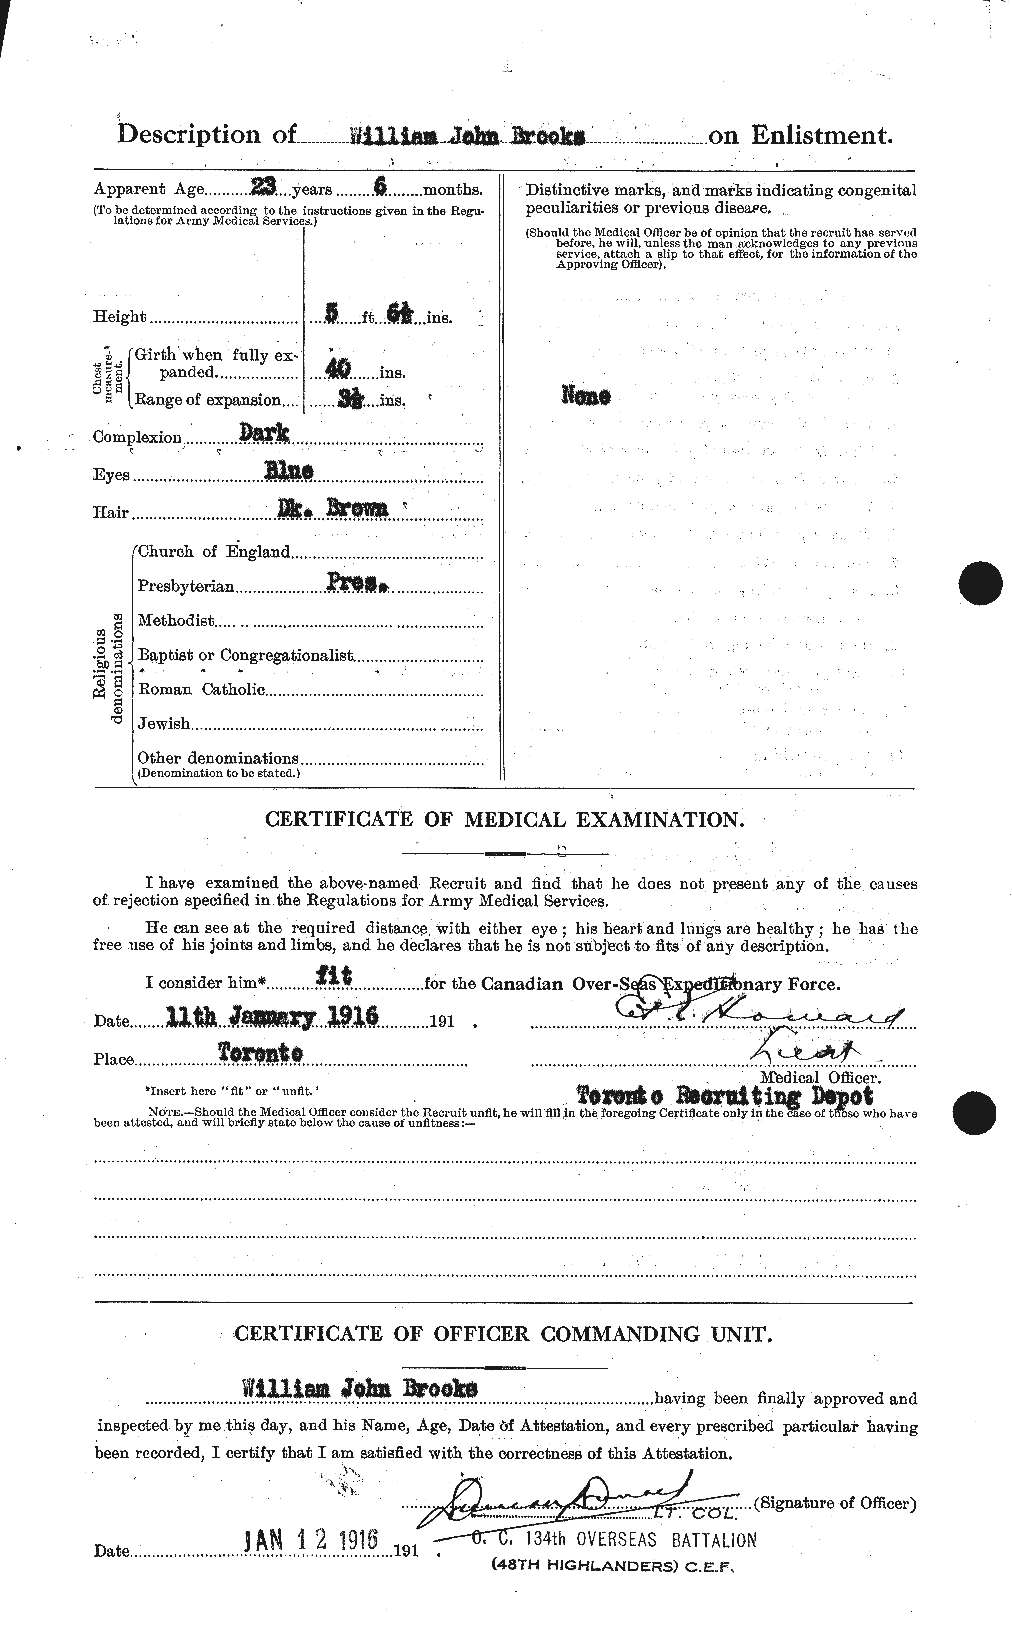 Personnel Records of the First World War - CEF 264757b